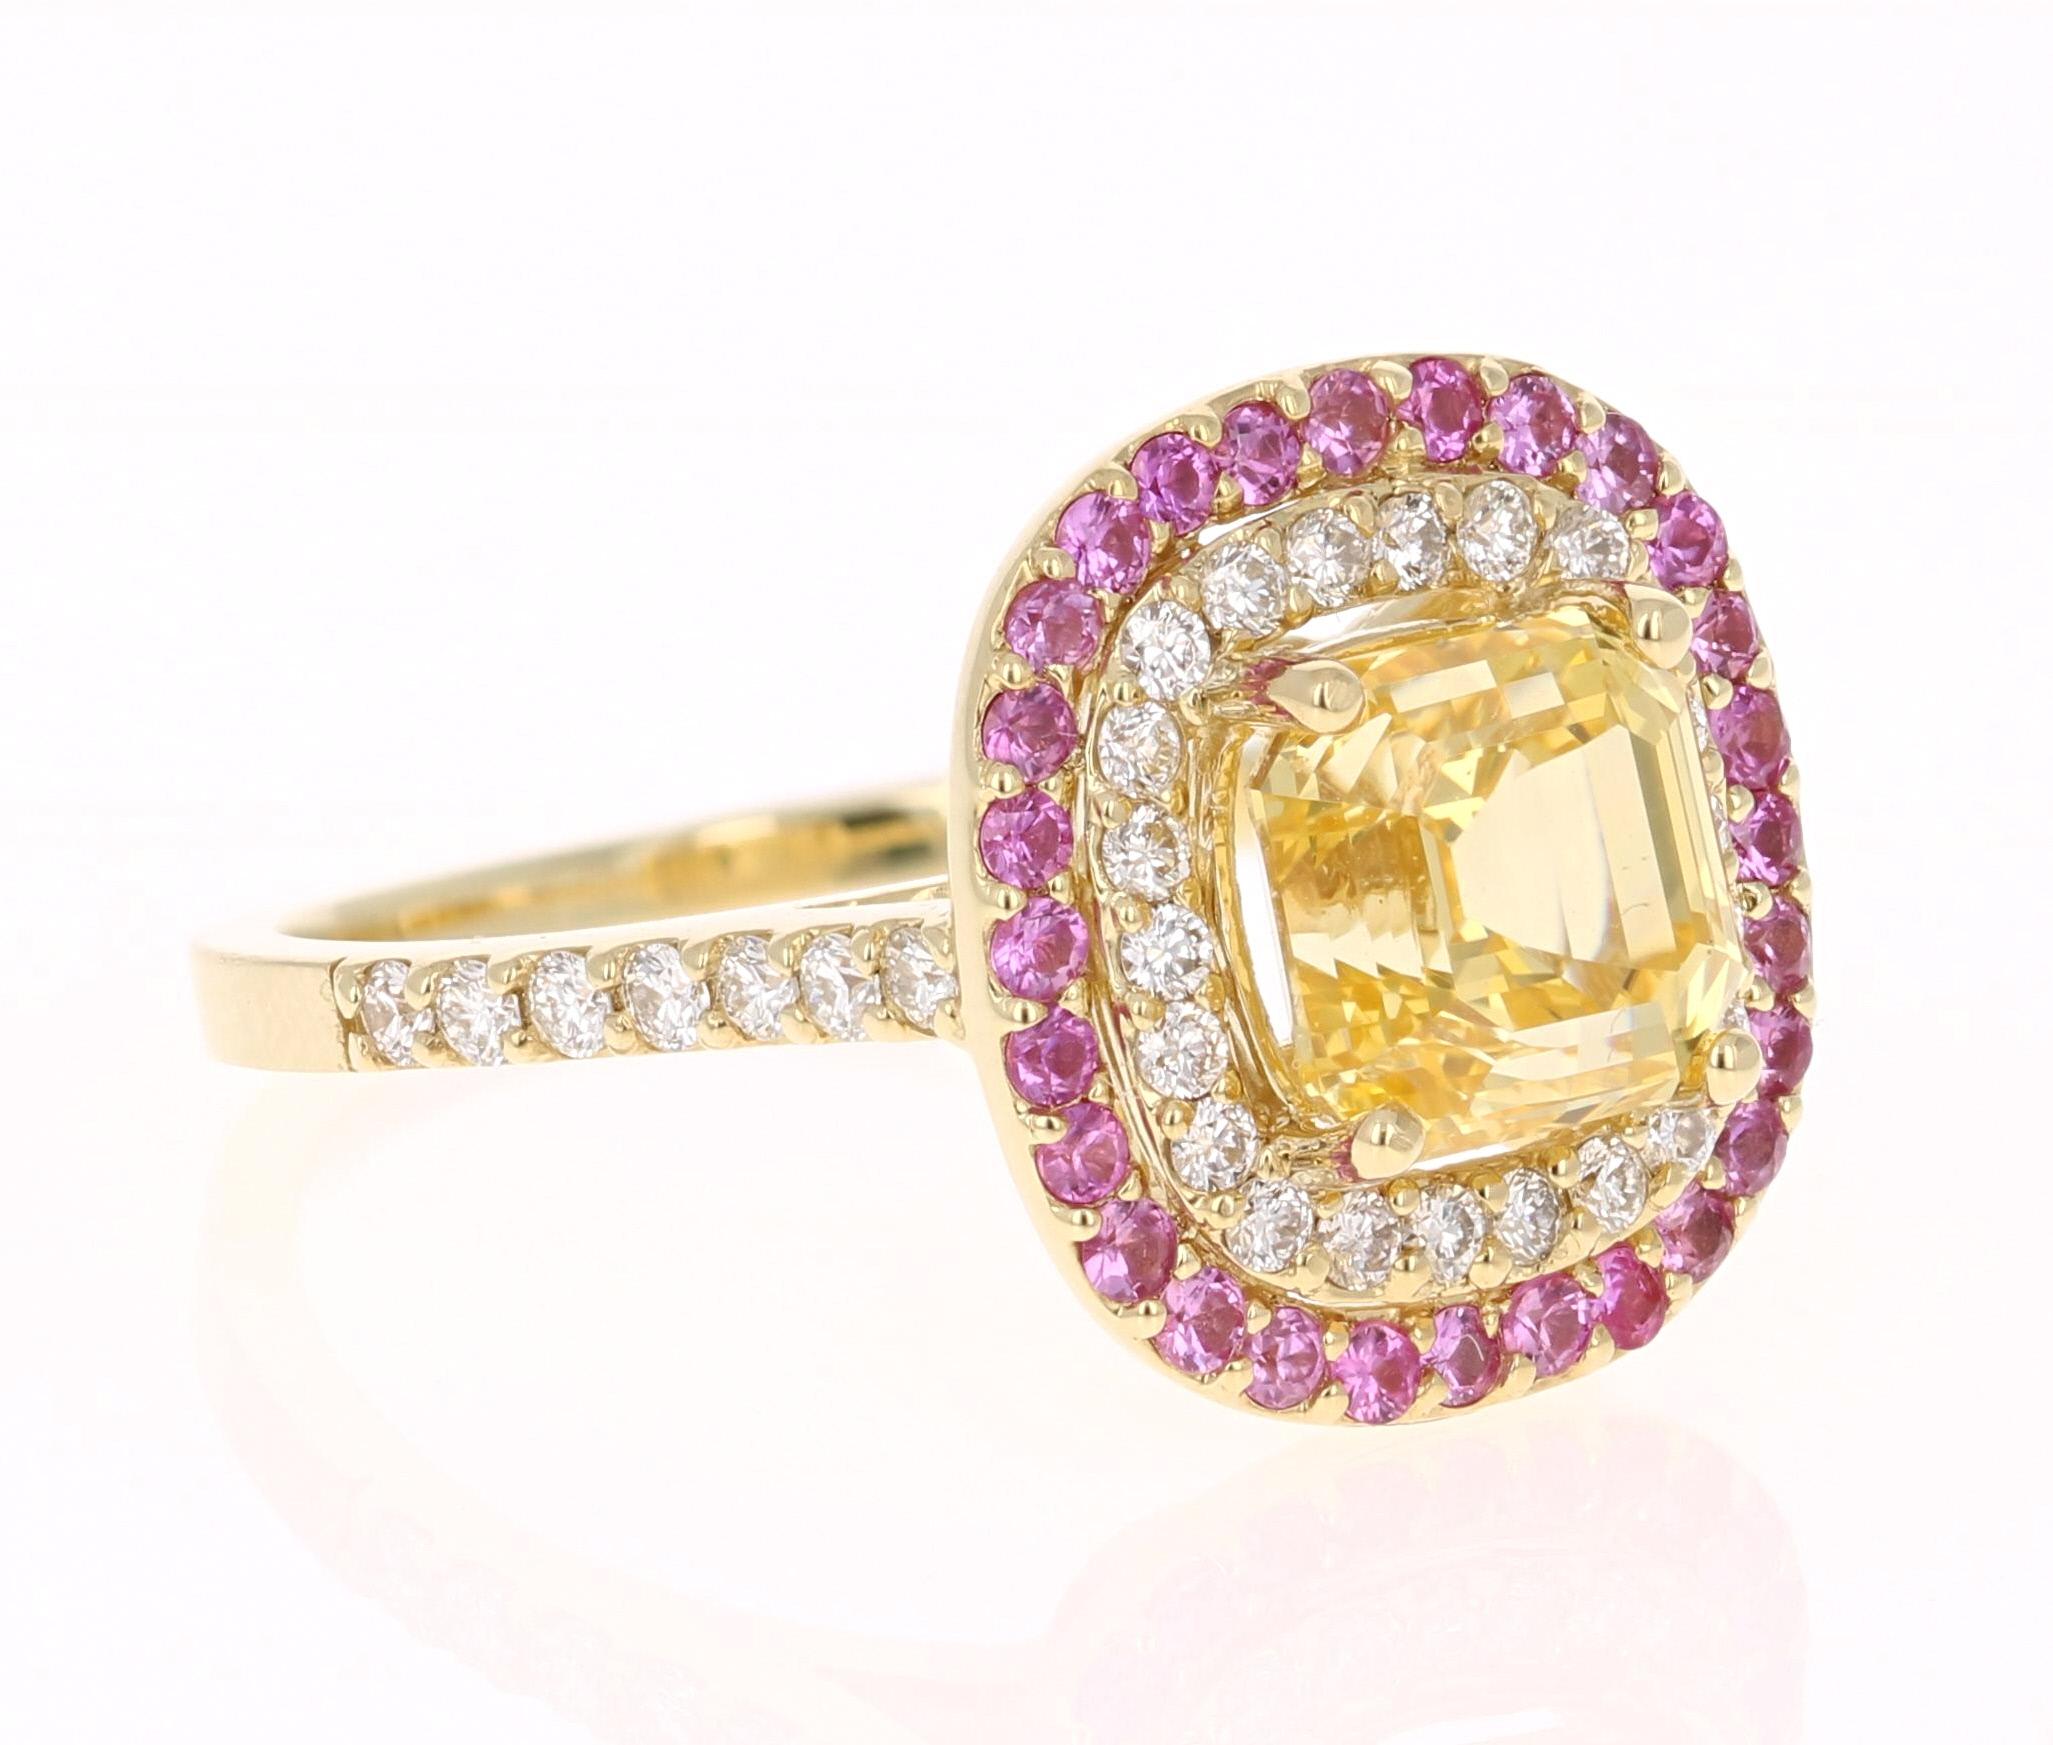 Simply Gorgeous!!!!

This beautiful ring has a Asscher Cut Yellow Sapphire that is GIA Certified. GIA Certificate number is: 2193204319. The Yellow Sapphire is natural and is non-heated stone.

It is surrounded by a halo of 36 Round Cut Diamonds